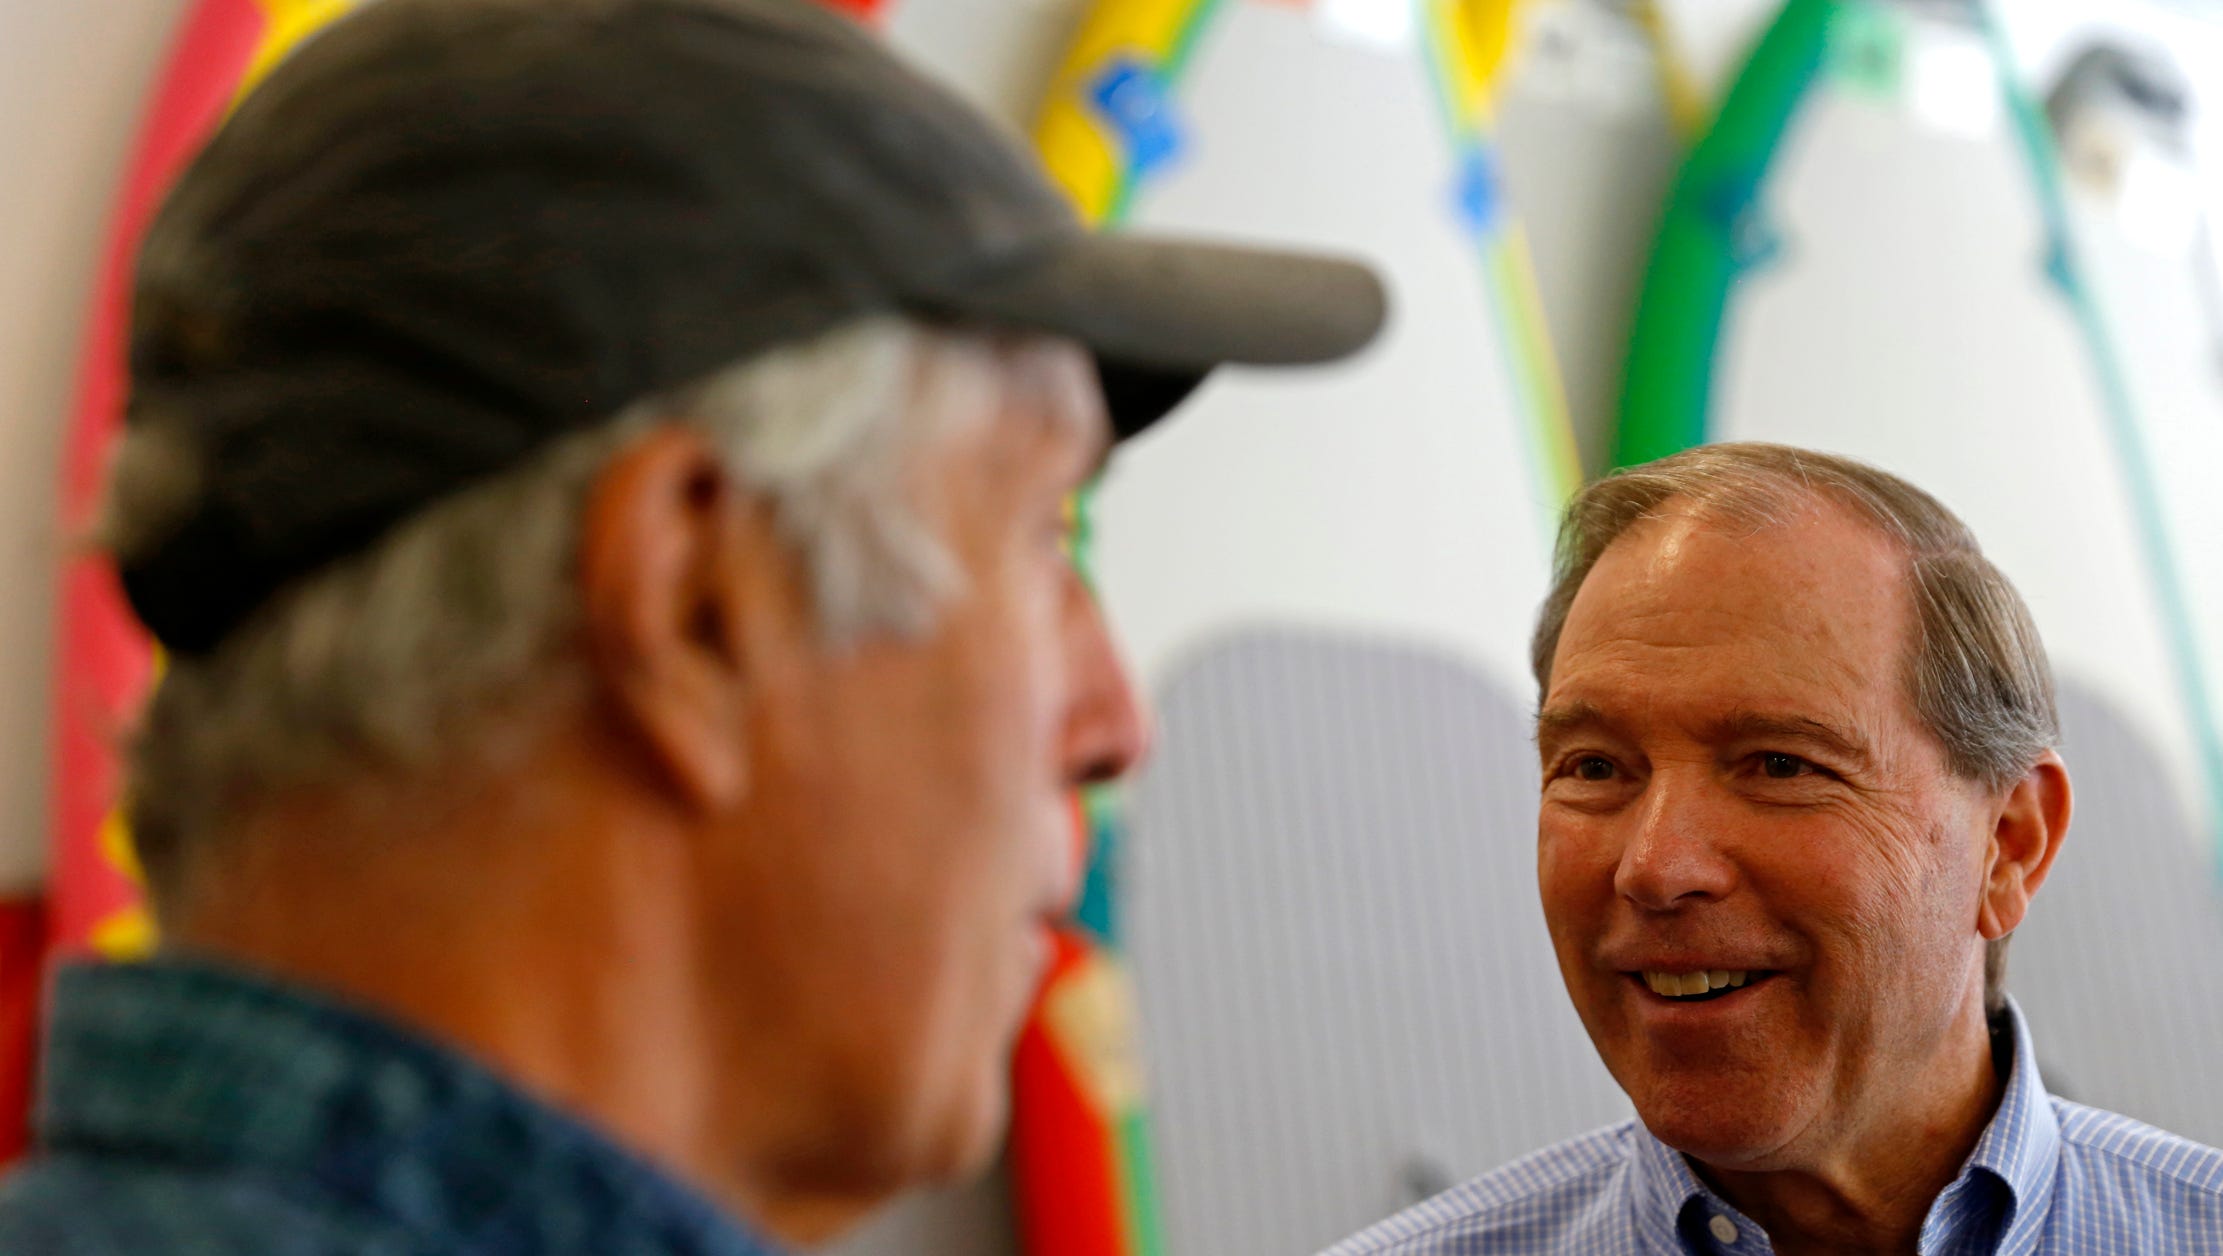 Owner Jack Kloepfer, left, talks about the different products at his shop with U.S. Sen. Tom Udall Friday at Jack's Plastic Welding Inc. in Aztec.